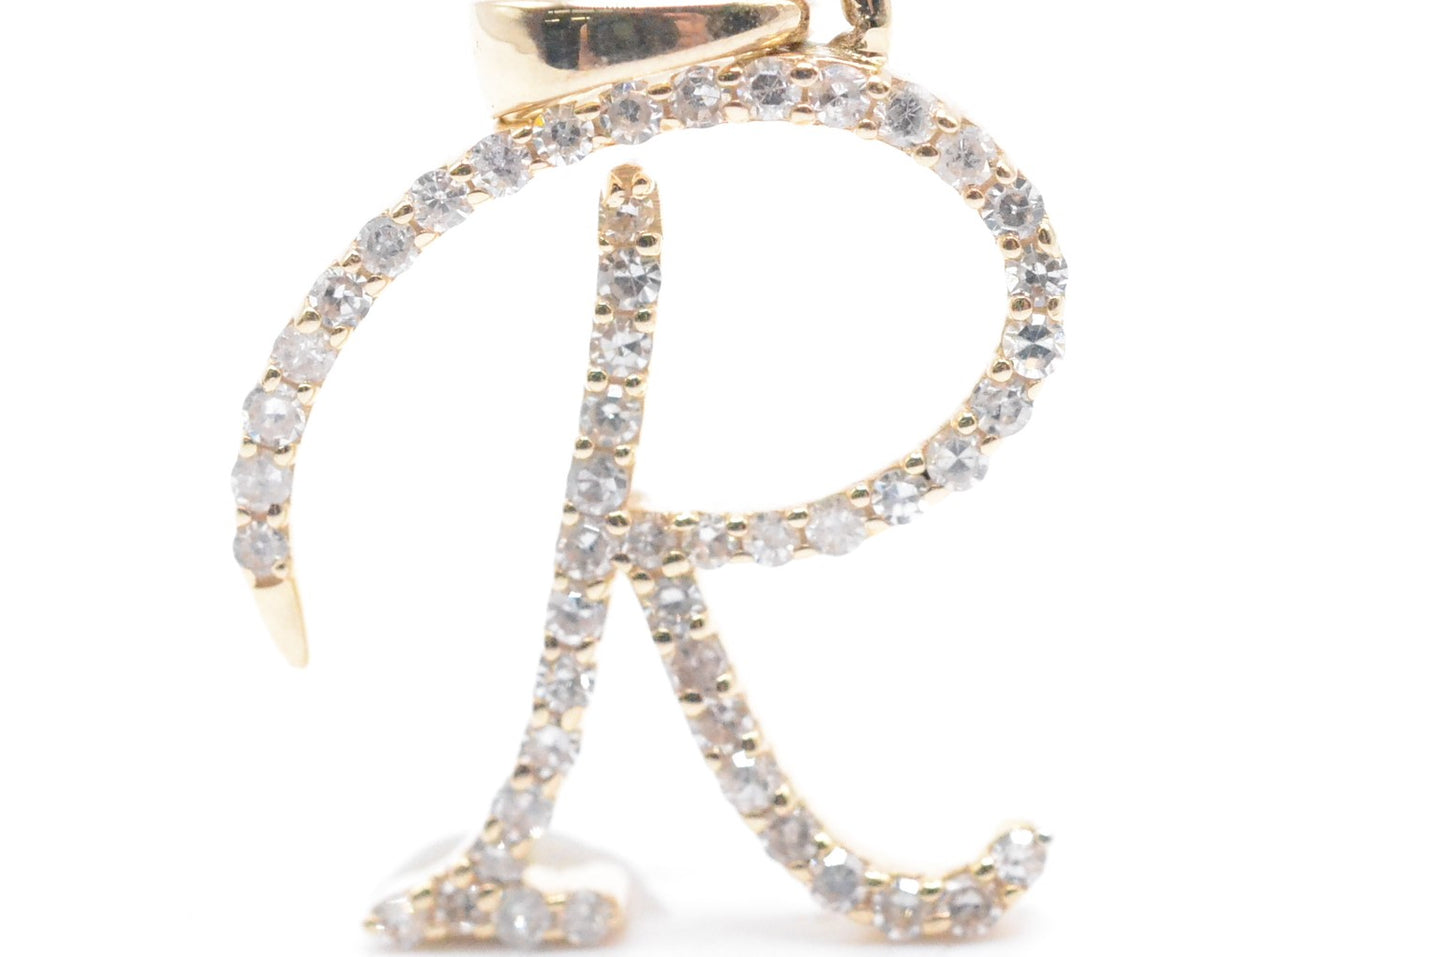 3/4" 0.30 cttw Diamond Letter "R" Pendant 14K Yellow Gold Letters & Numbers